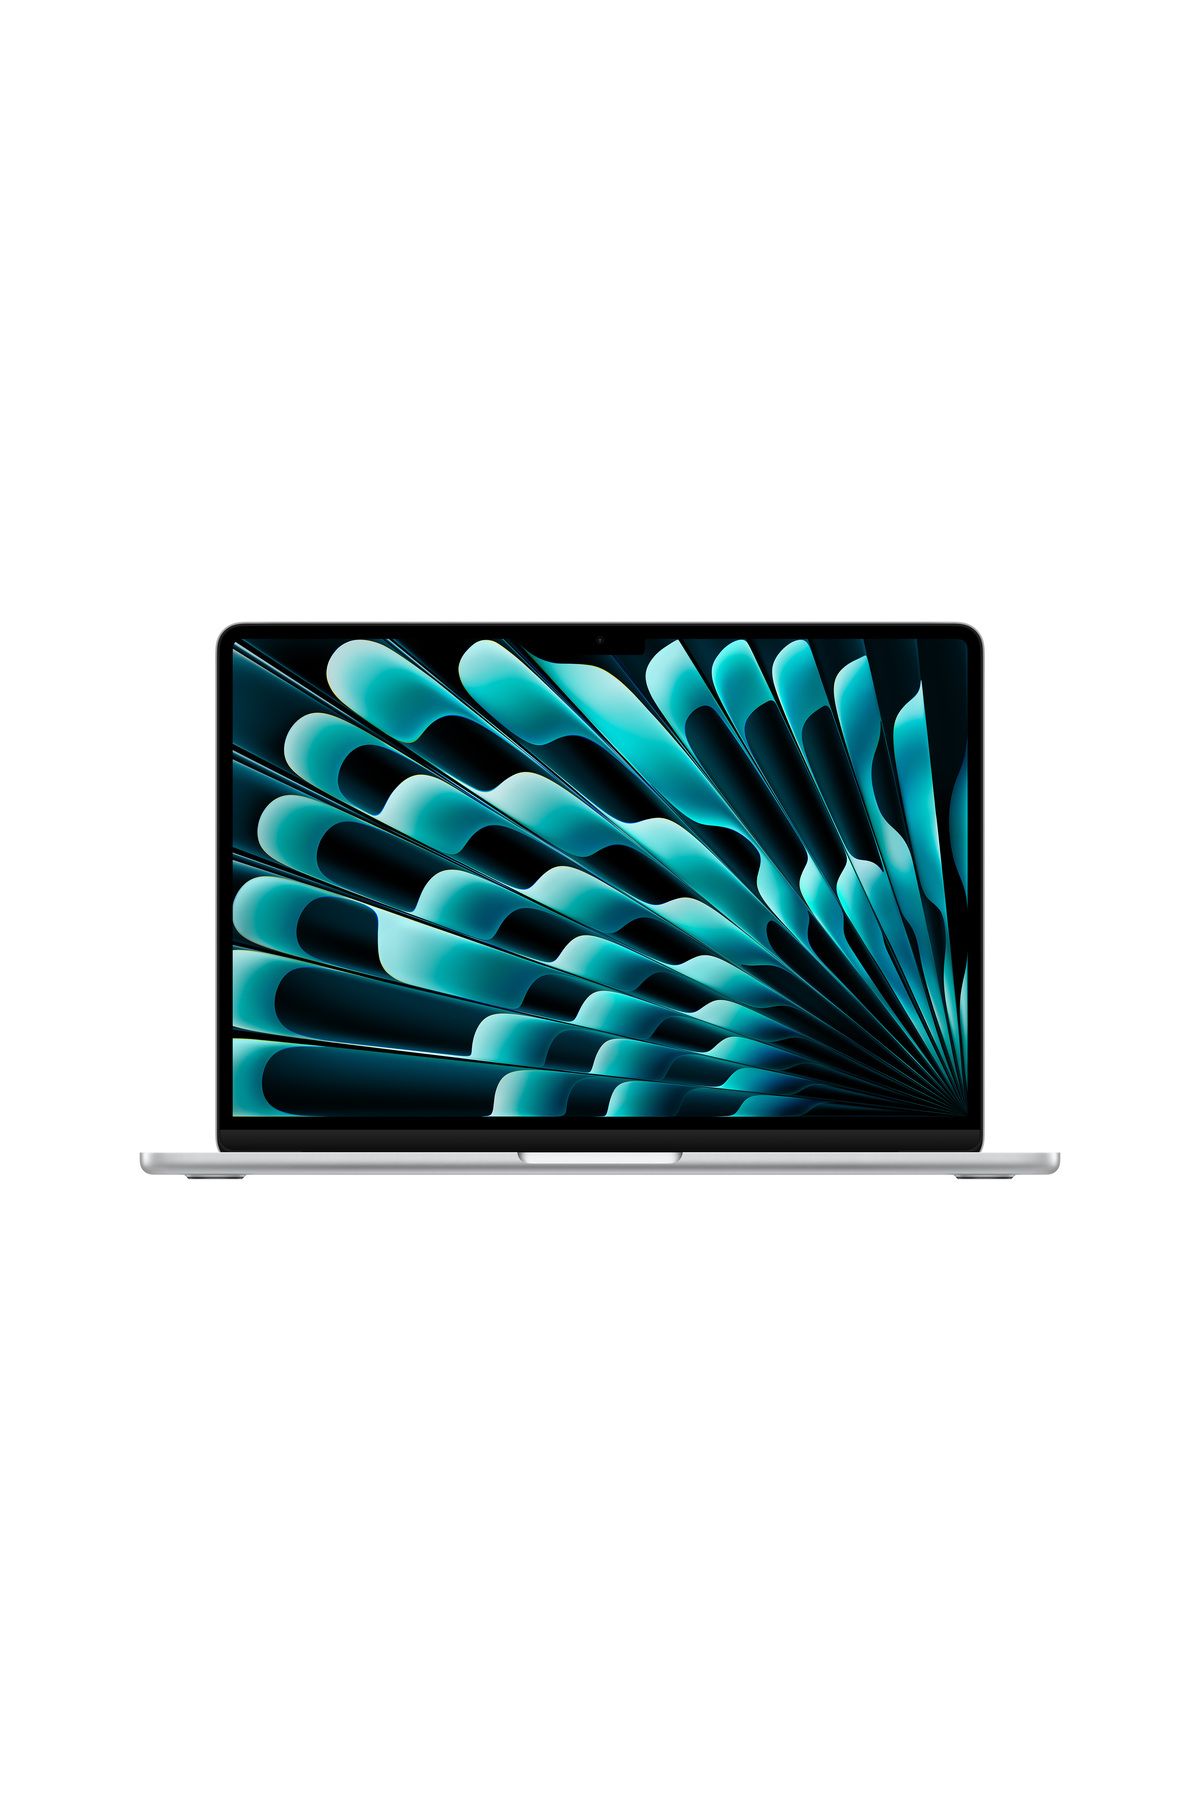 Apple 13-inch MacBook Air: Apple M3 chip with 8-core CPU and 10-core GPU, 8GB, 512GB SSD - Silver